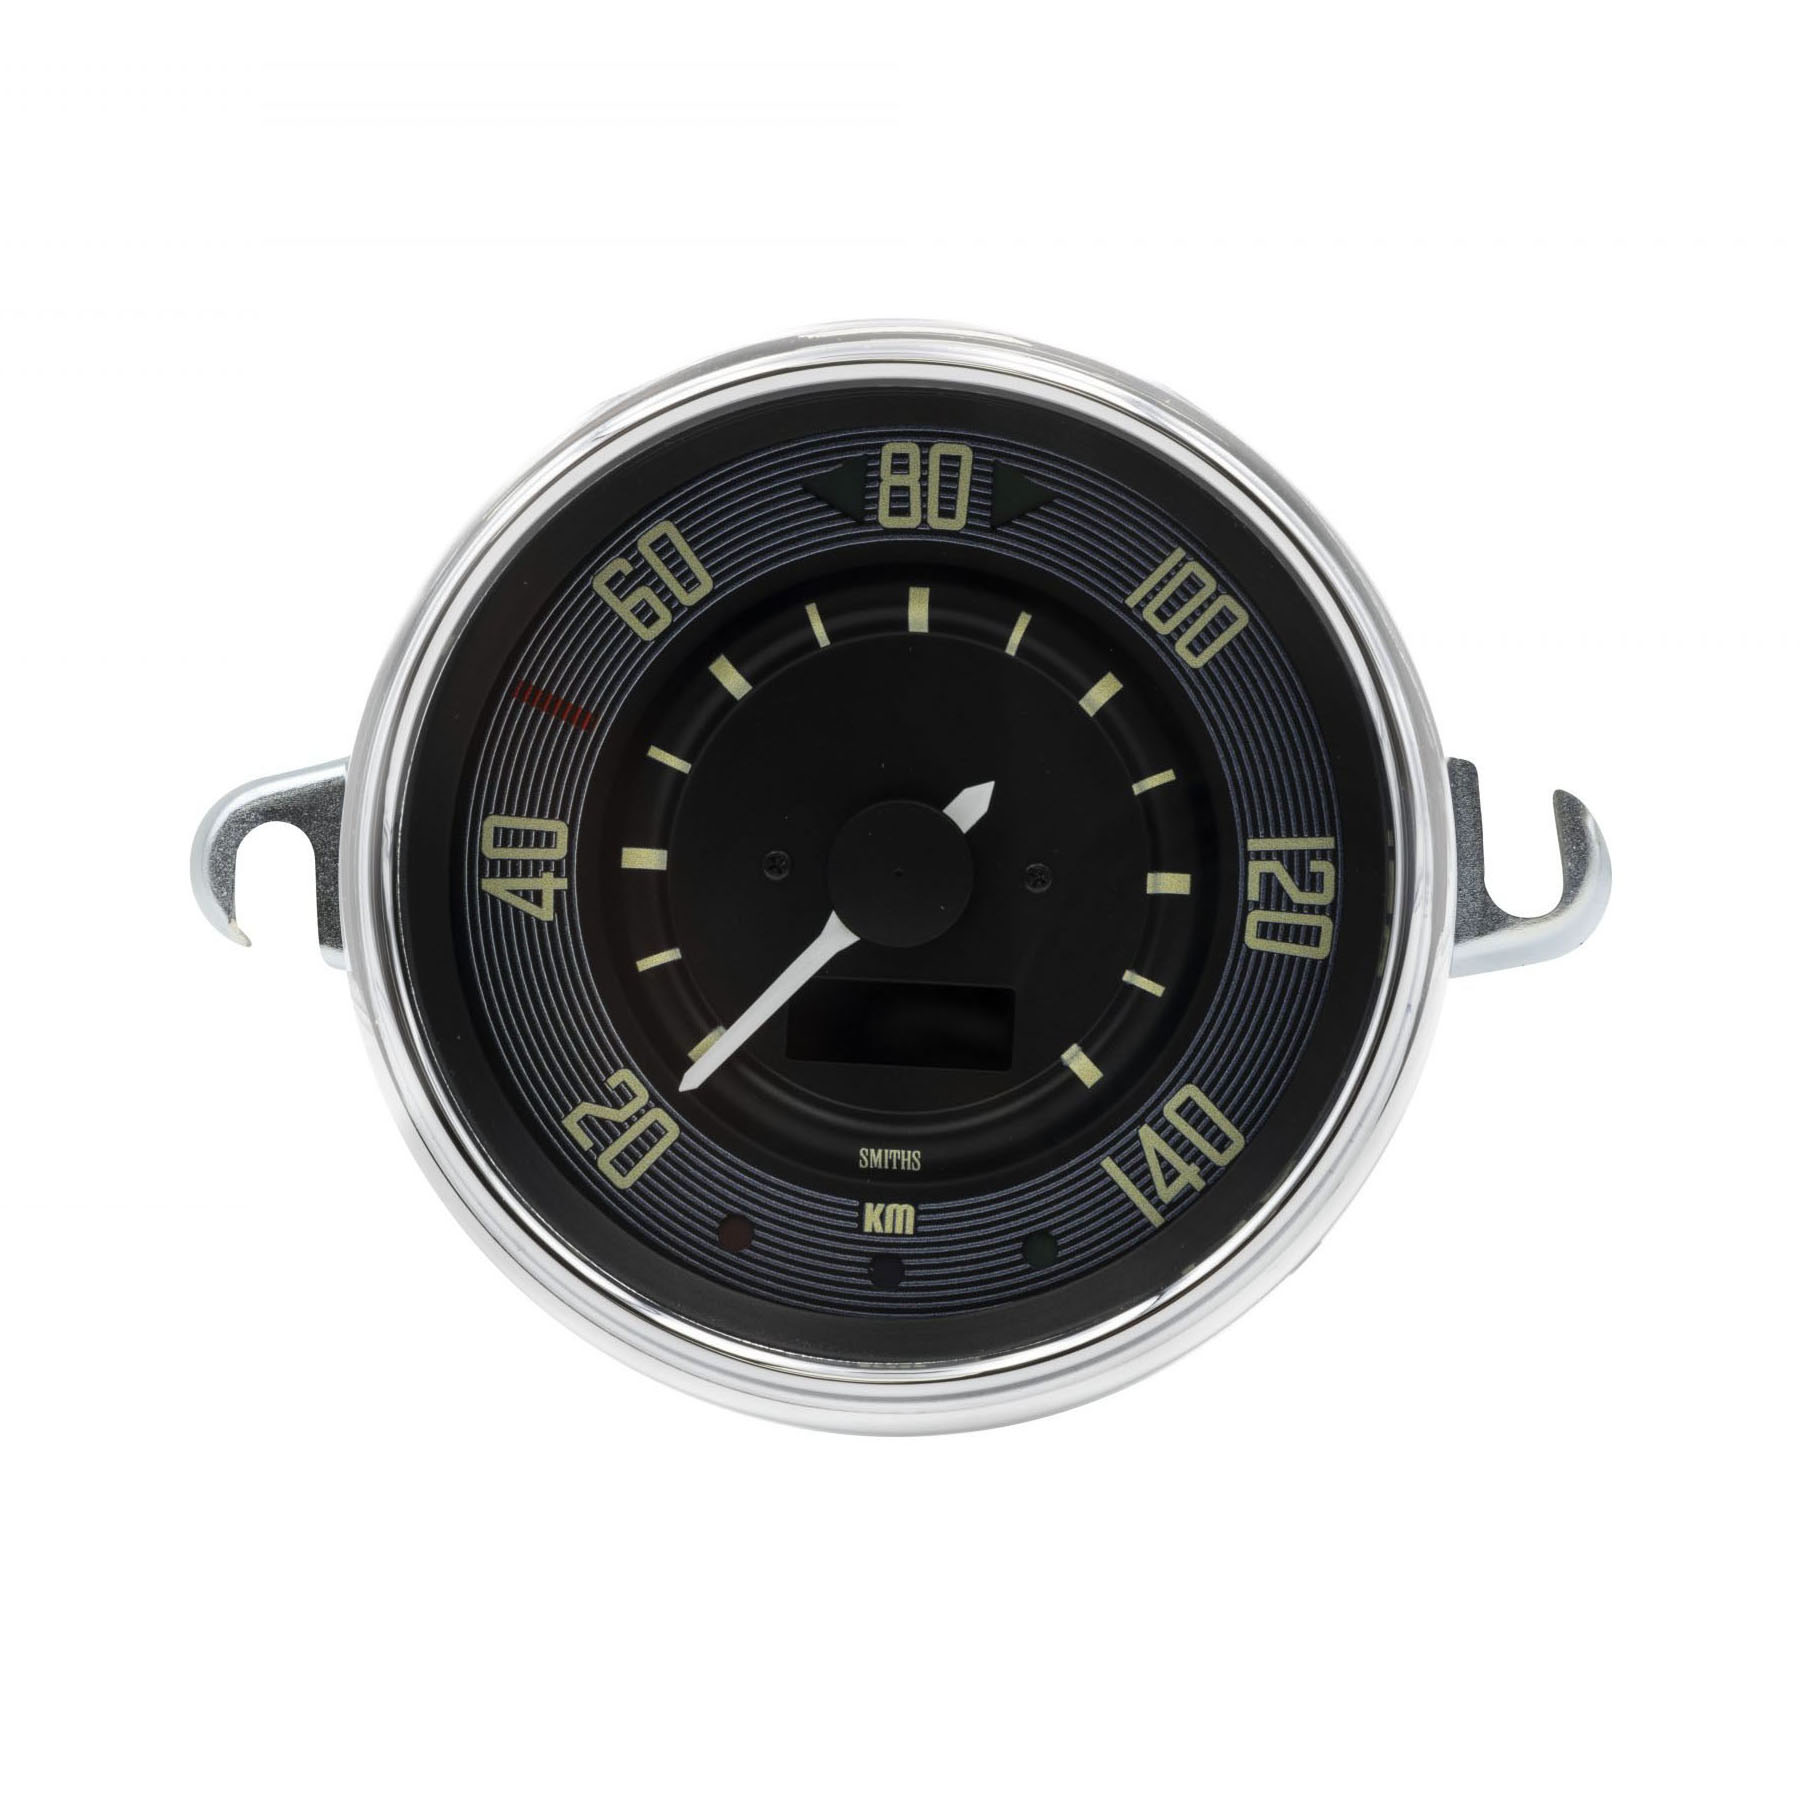 Vw Beetle And 1971 1972 Super Beetle Speedometer By Smiths Black Dial Chrome Bezel 0 140 Kmh